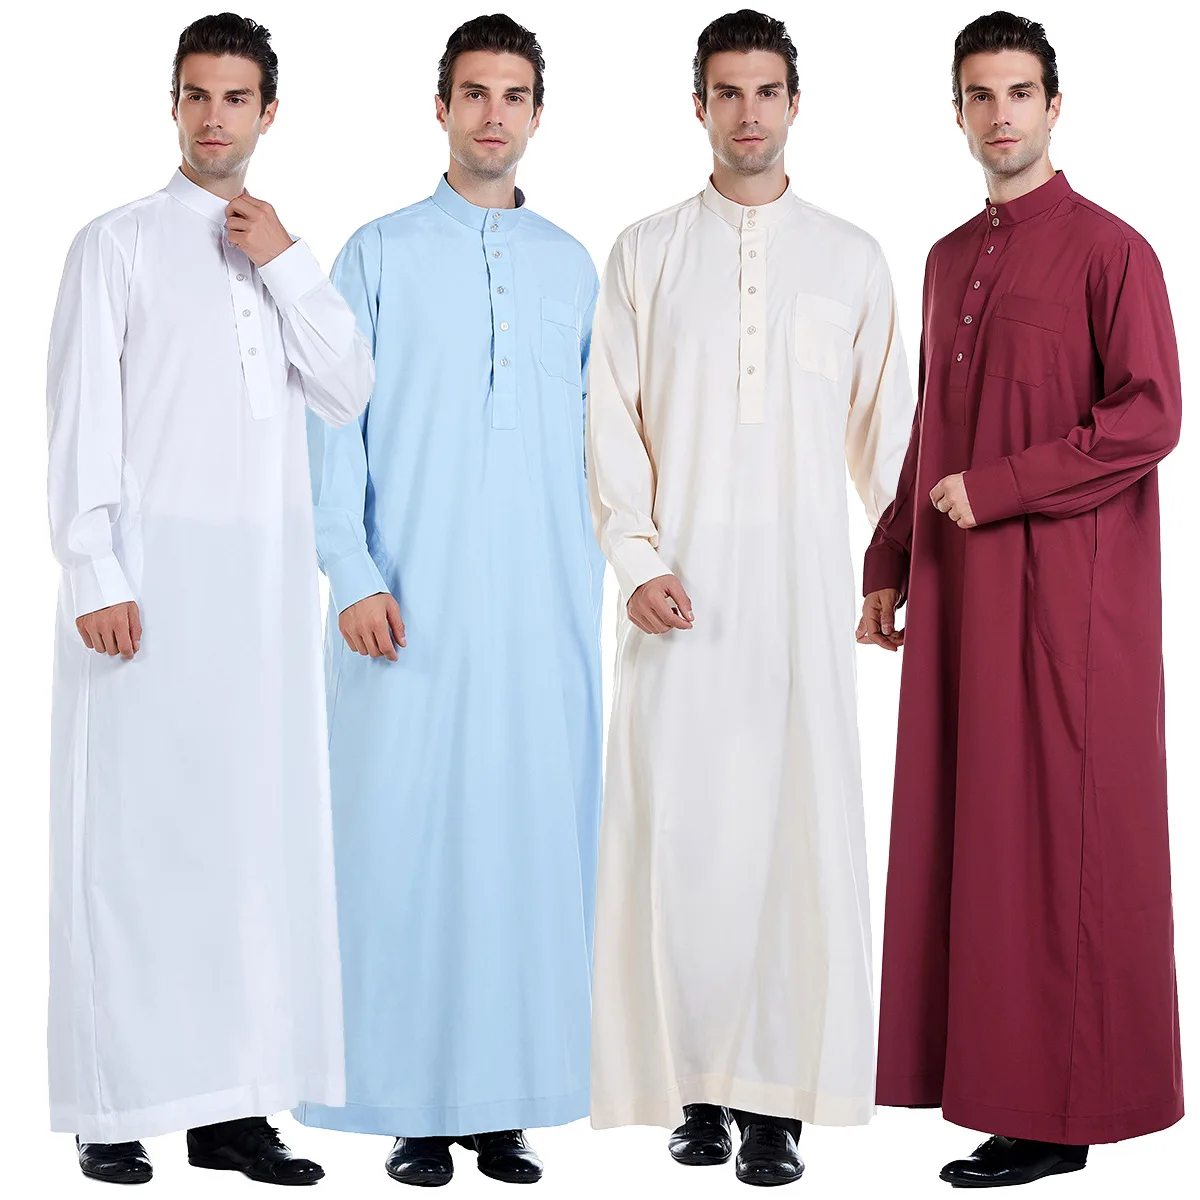 

Muslim Men's Clothing Arab Middle East Men's Robe Stand Collar Hui Nationality Clothing 2021 New Products, White, sky blue, wine red, beige